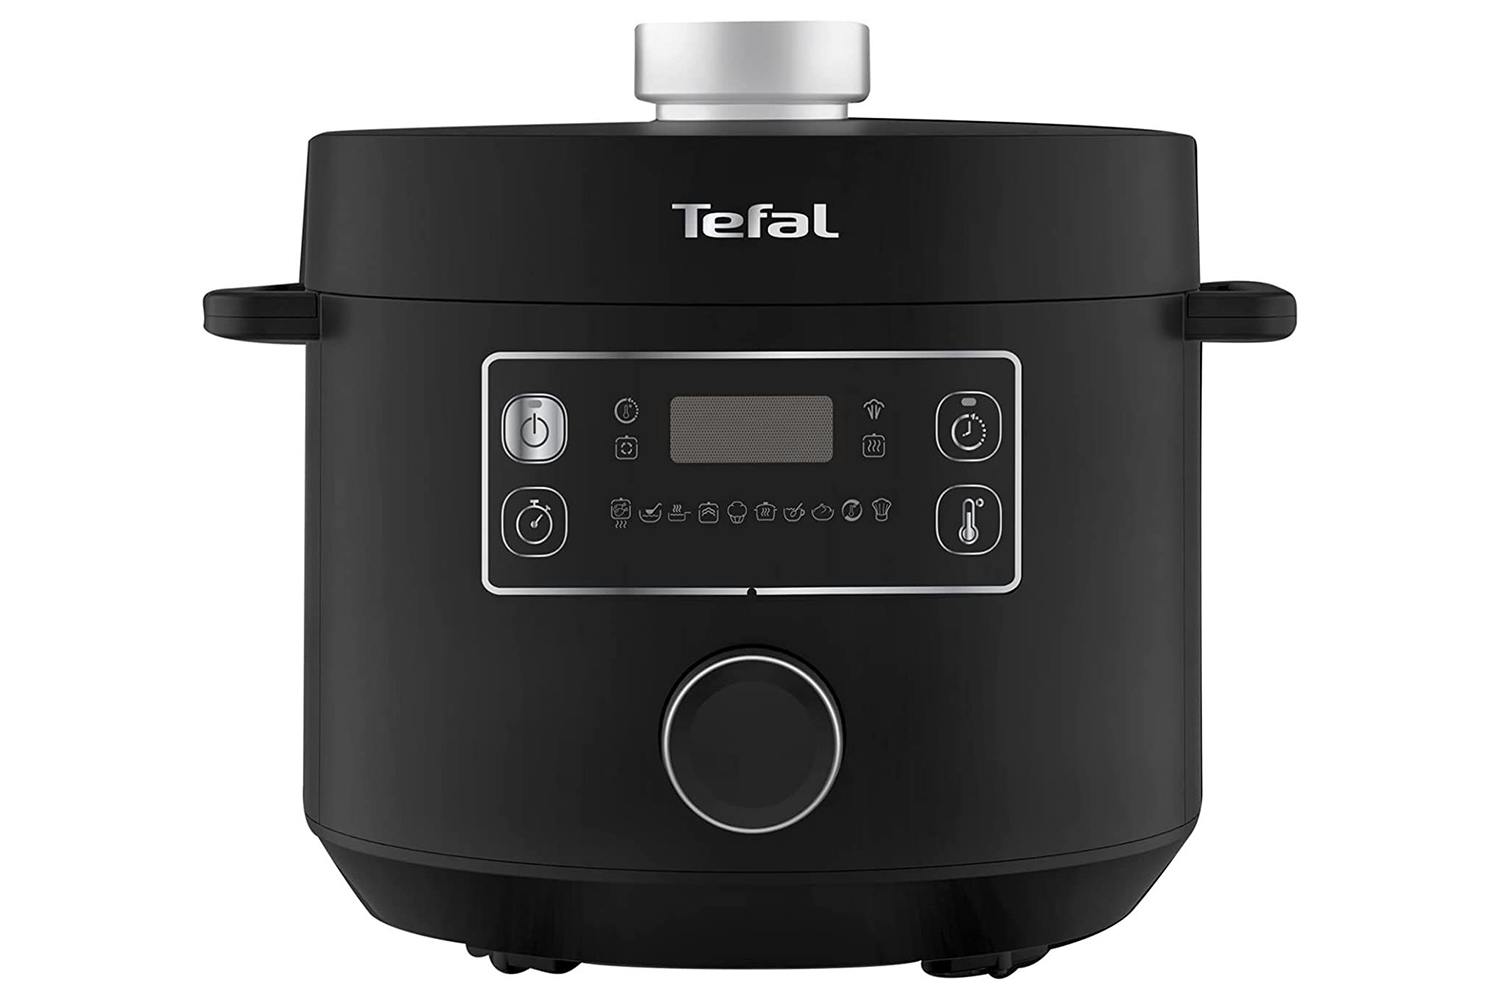 https://hniesfp.imgix.net/8/images/detailed/374/Cooker_Tefal_CY754840.jpg?fit=fill&bg=0FFF&w=1500&h=1000&auto=format,compress